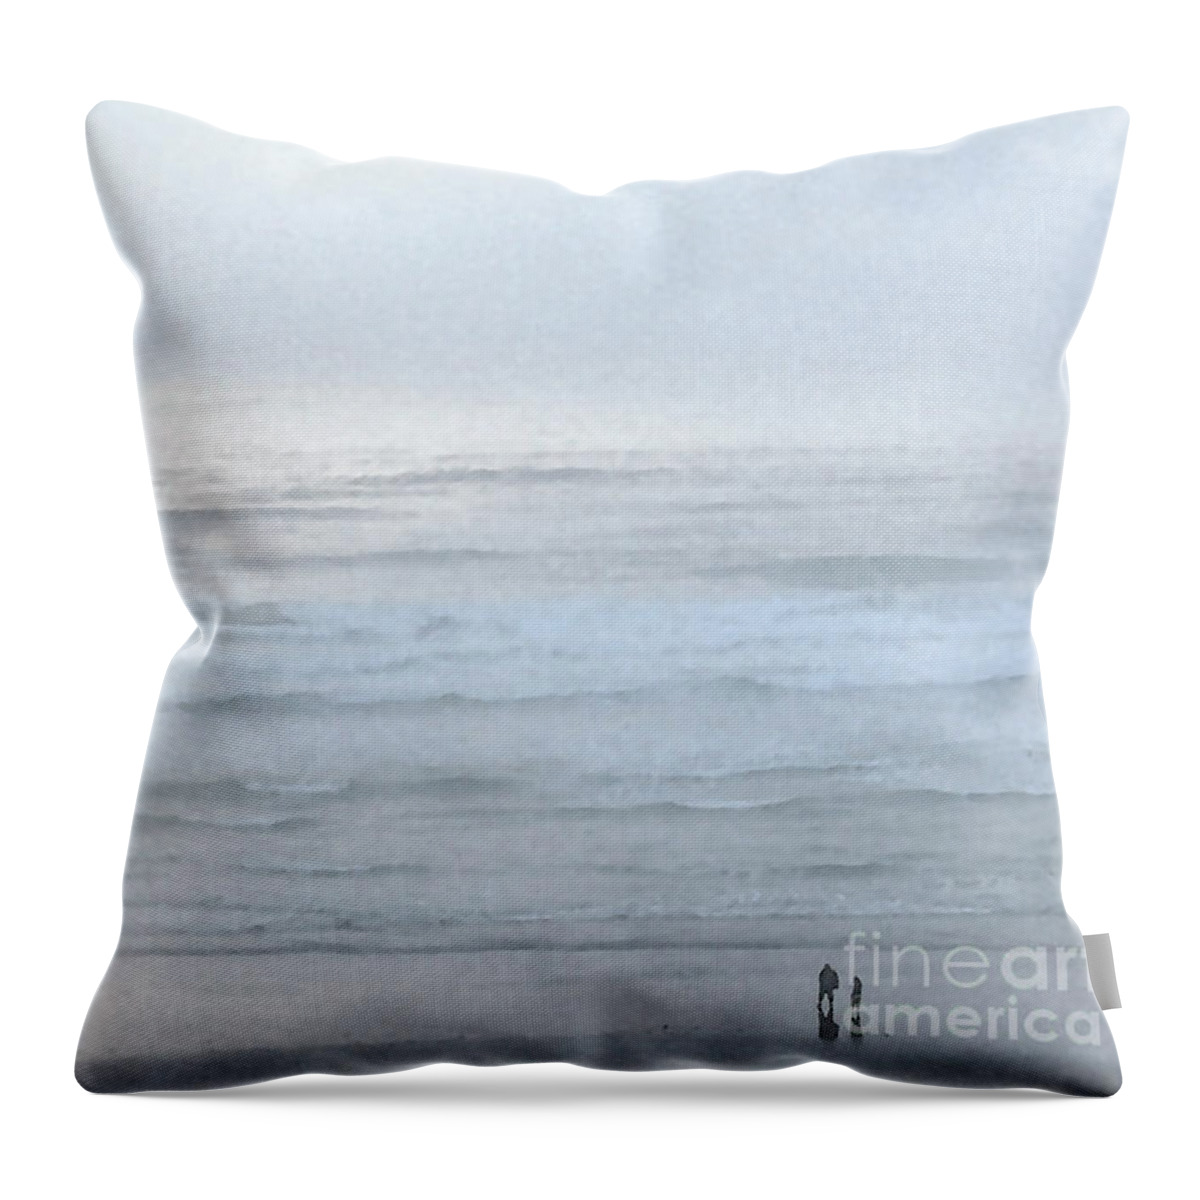 Coastal Throw Pillow featuring the digital art Beach Tranquility by Kirt Tisdale